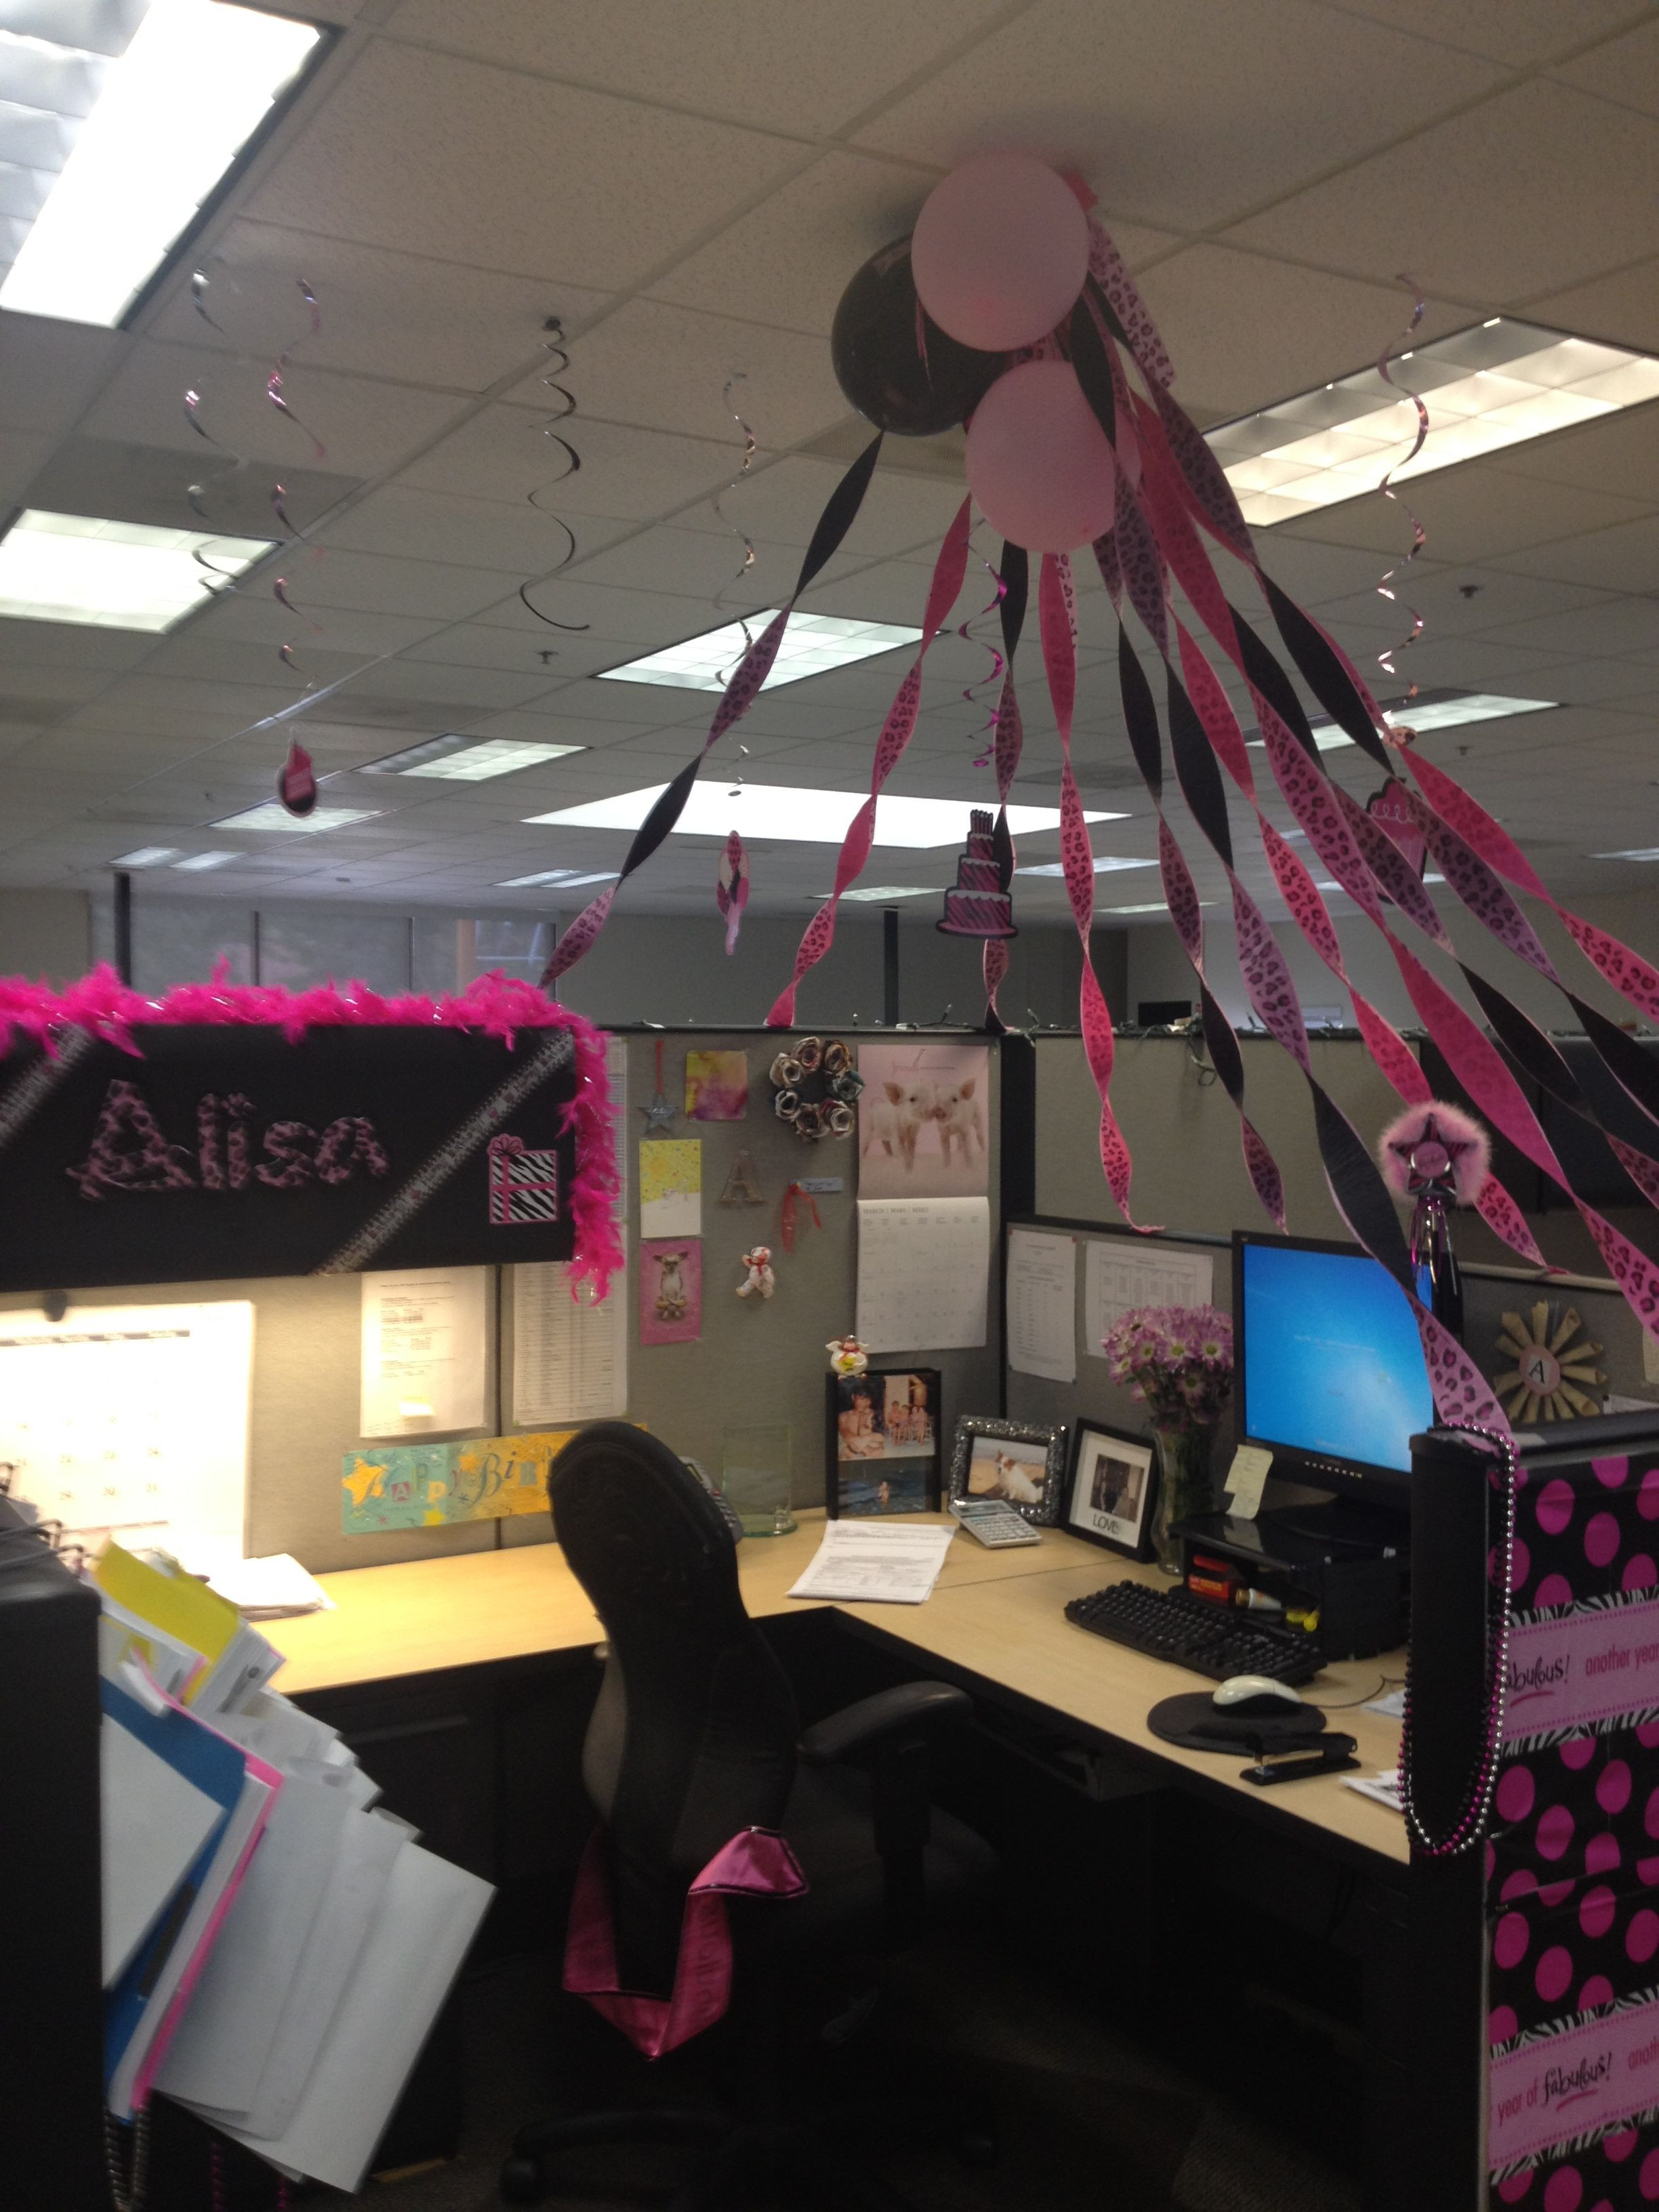 50Th Birthday Decoration Ideas For Office
 Our office birthday tradition is to decorate cubicles to